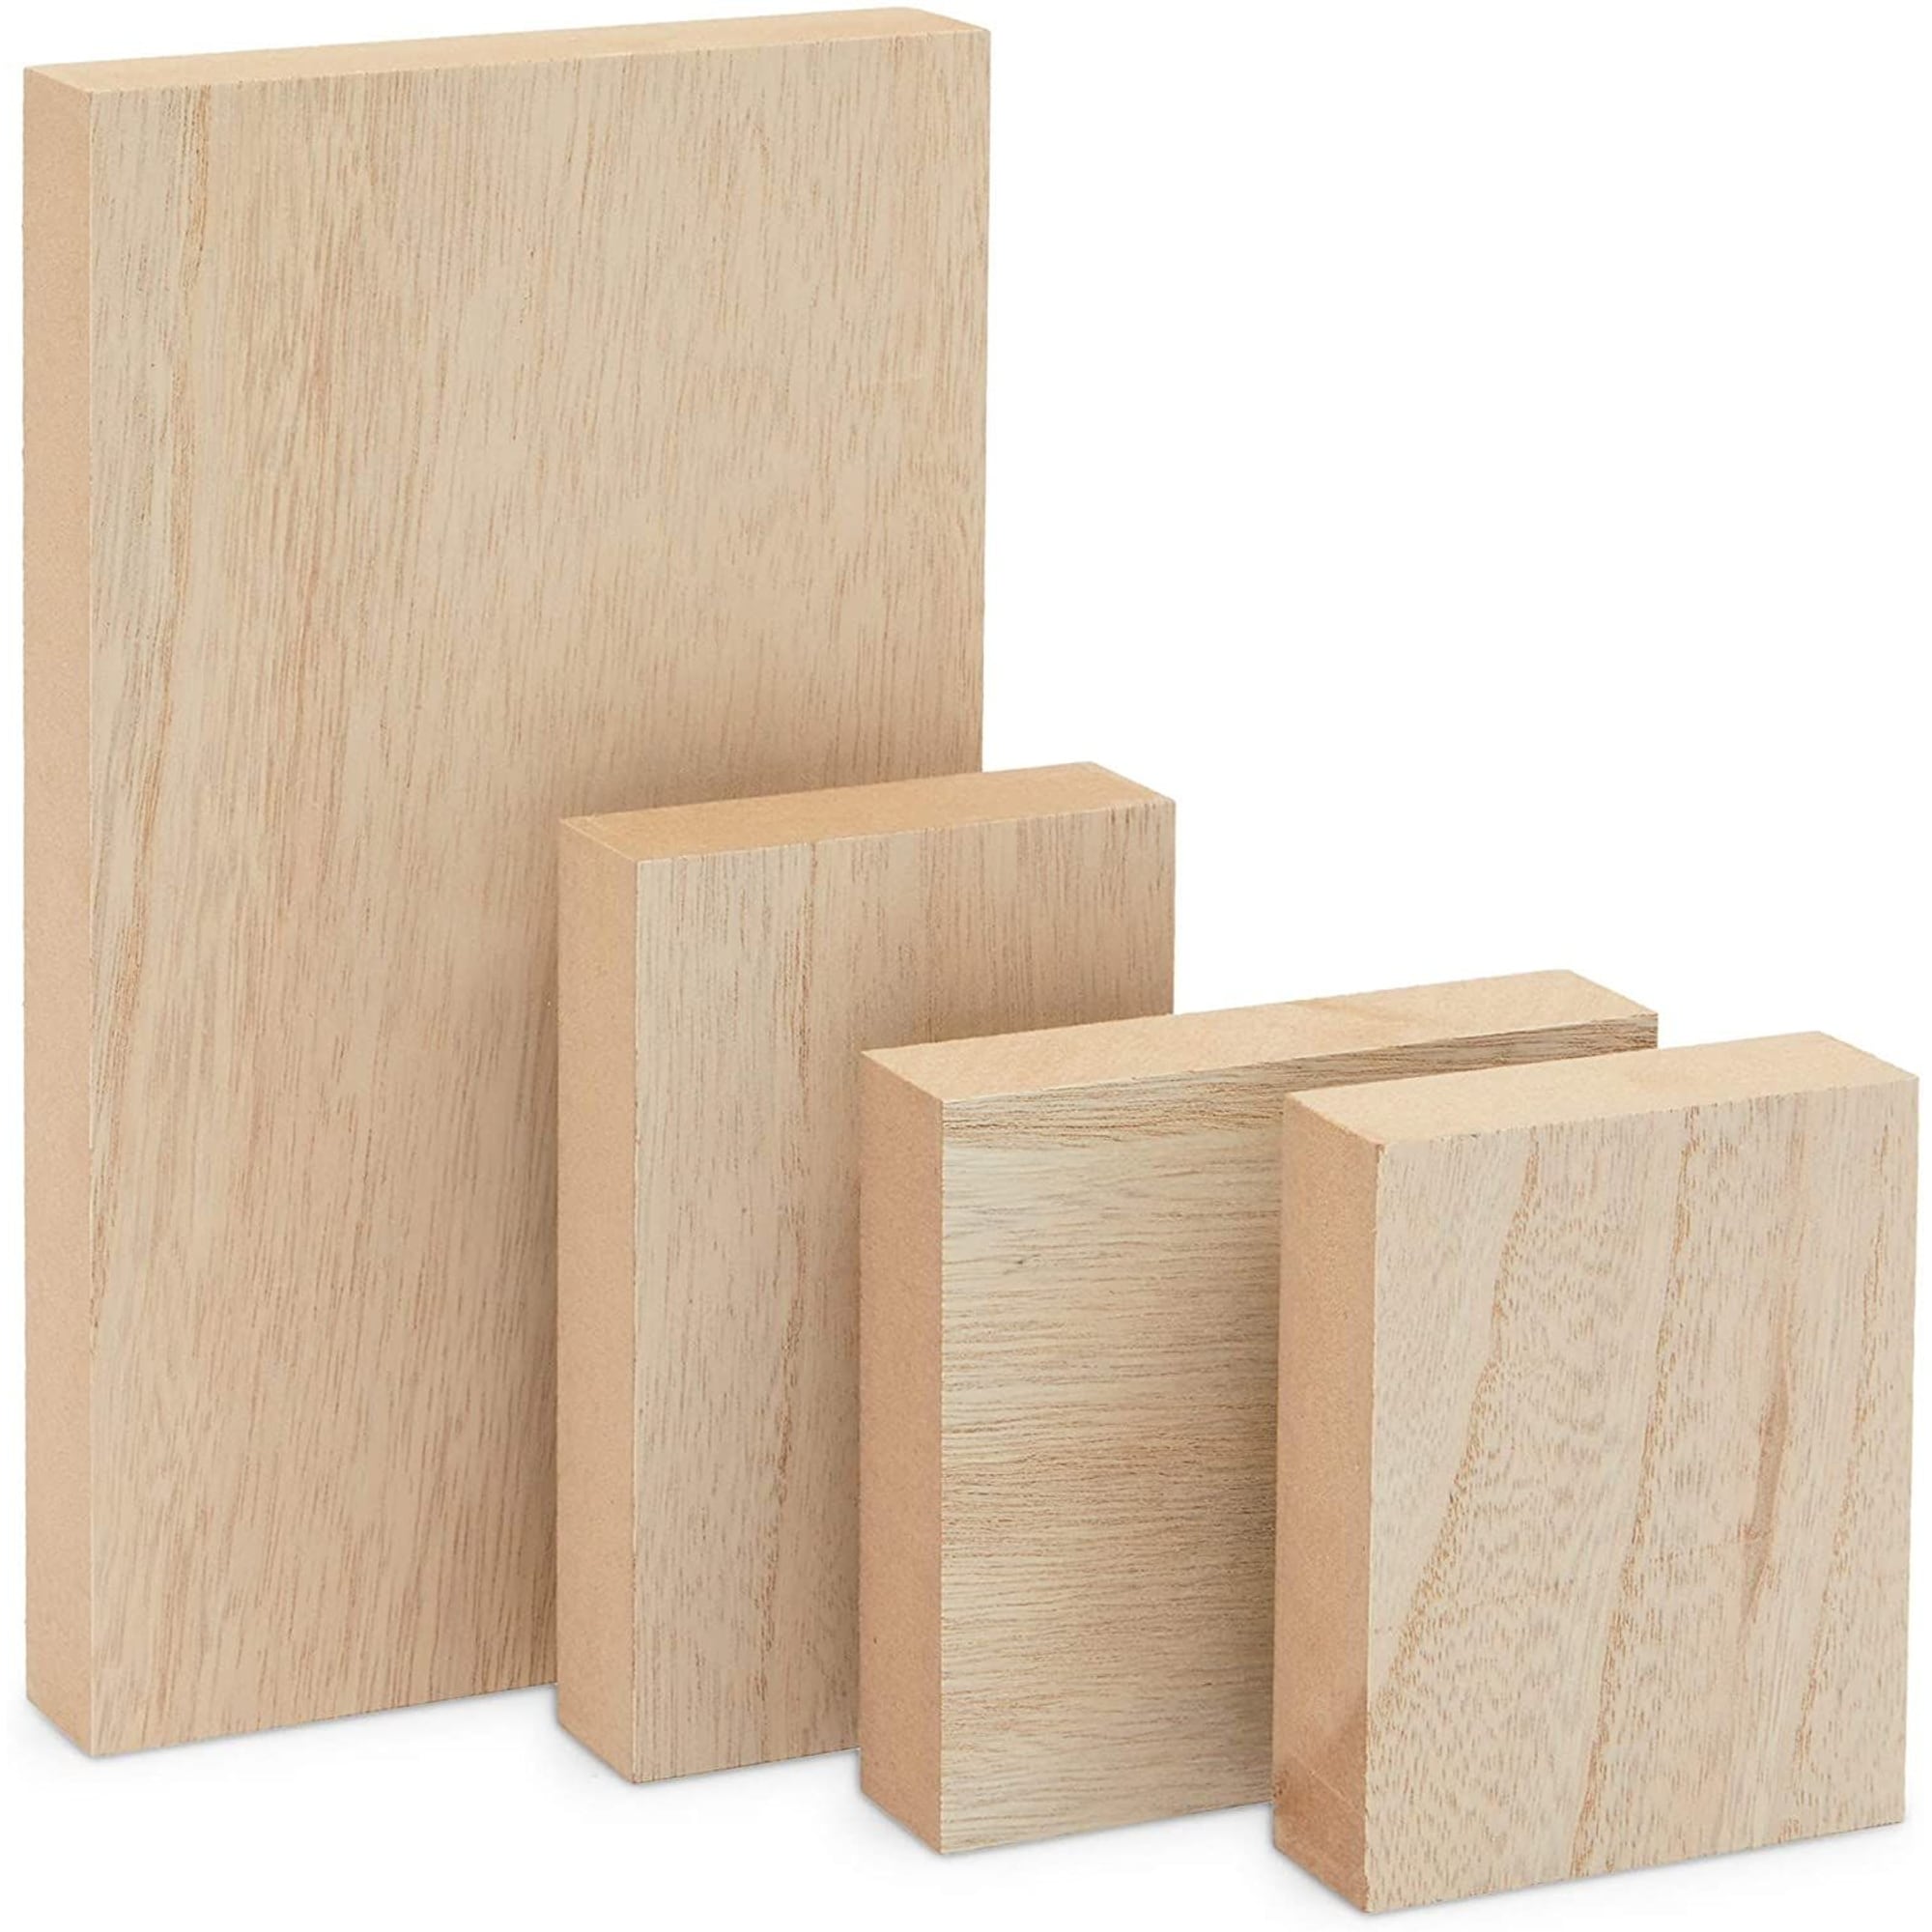 Unfinished Wood Rectangles for Crafts, 1 inch Thick Wooden Blocks (5 x 3 in, 4 Pack)